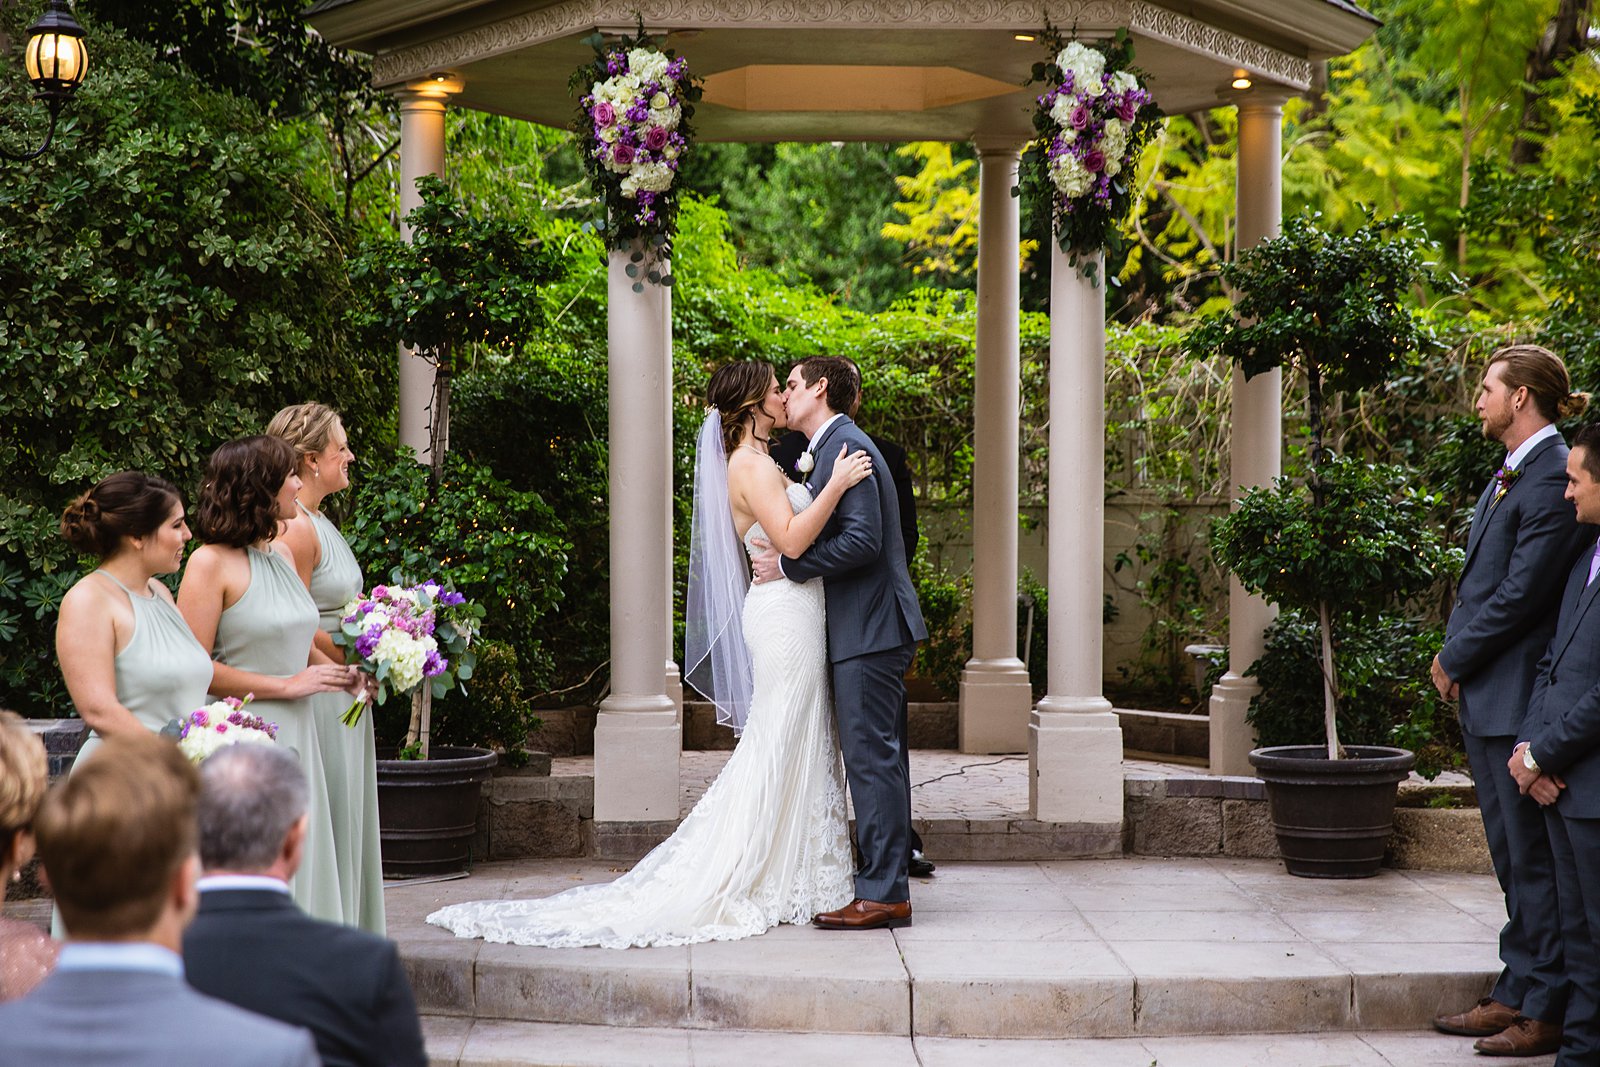 Bride and Groom share their first kiss during their wedding ceremony at The Wright House by Arizona wedding photographer PMA Photography.